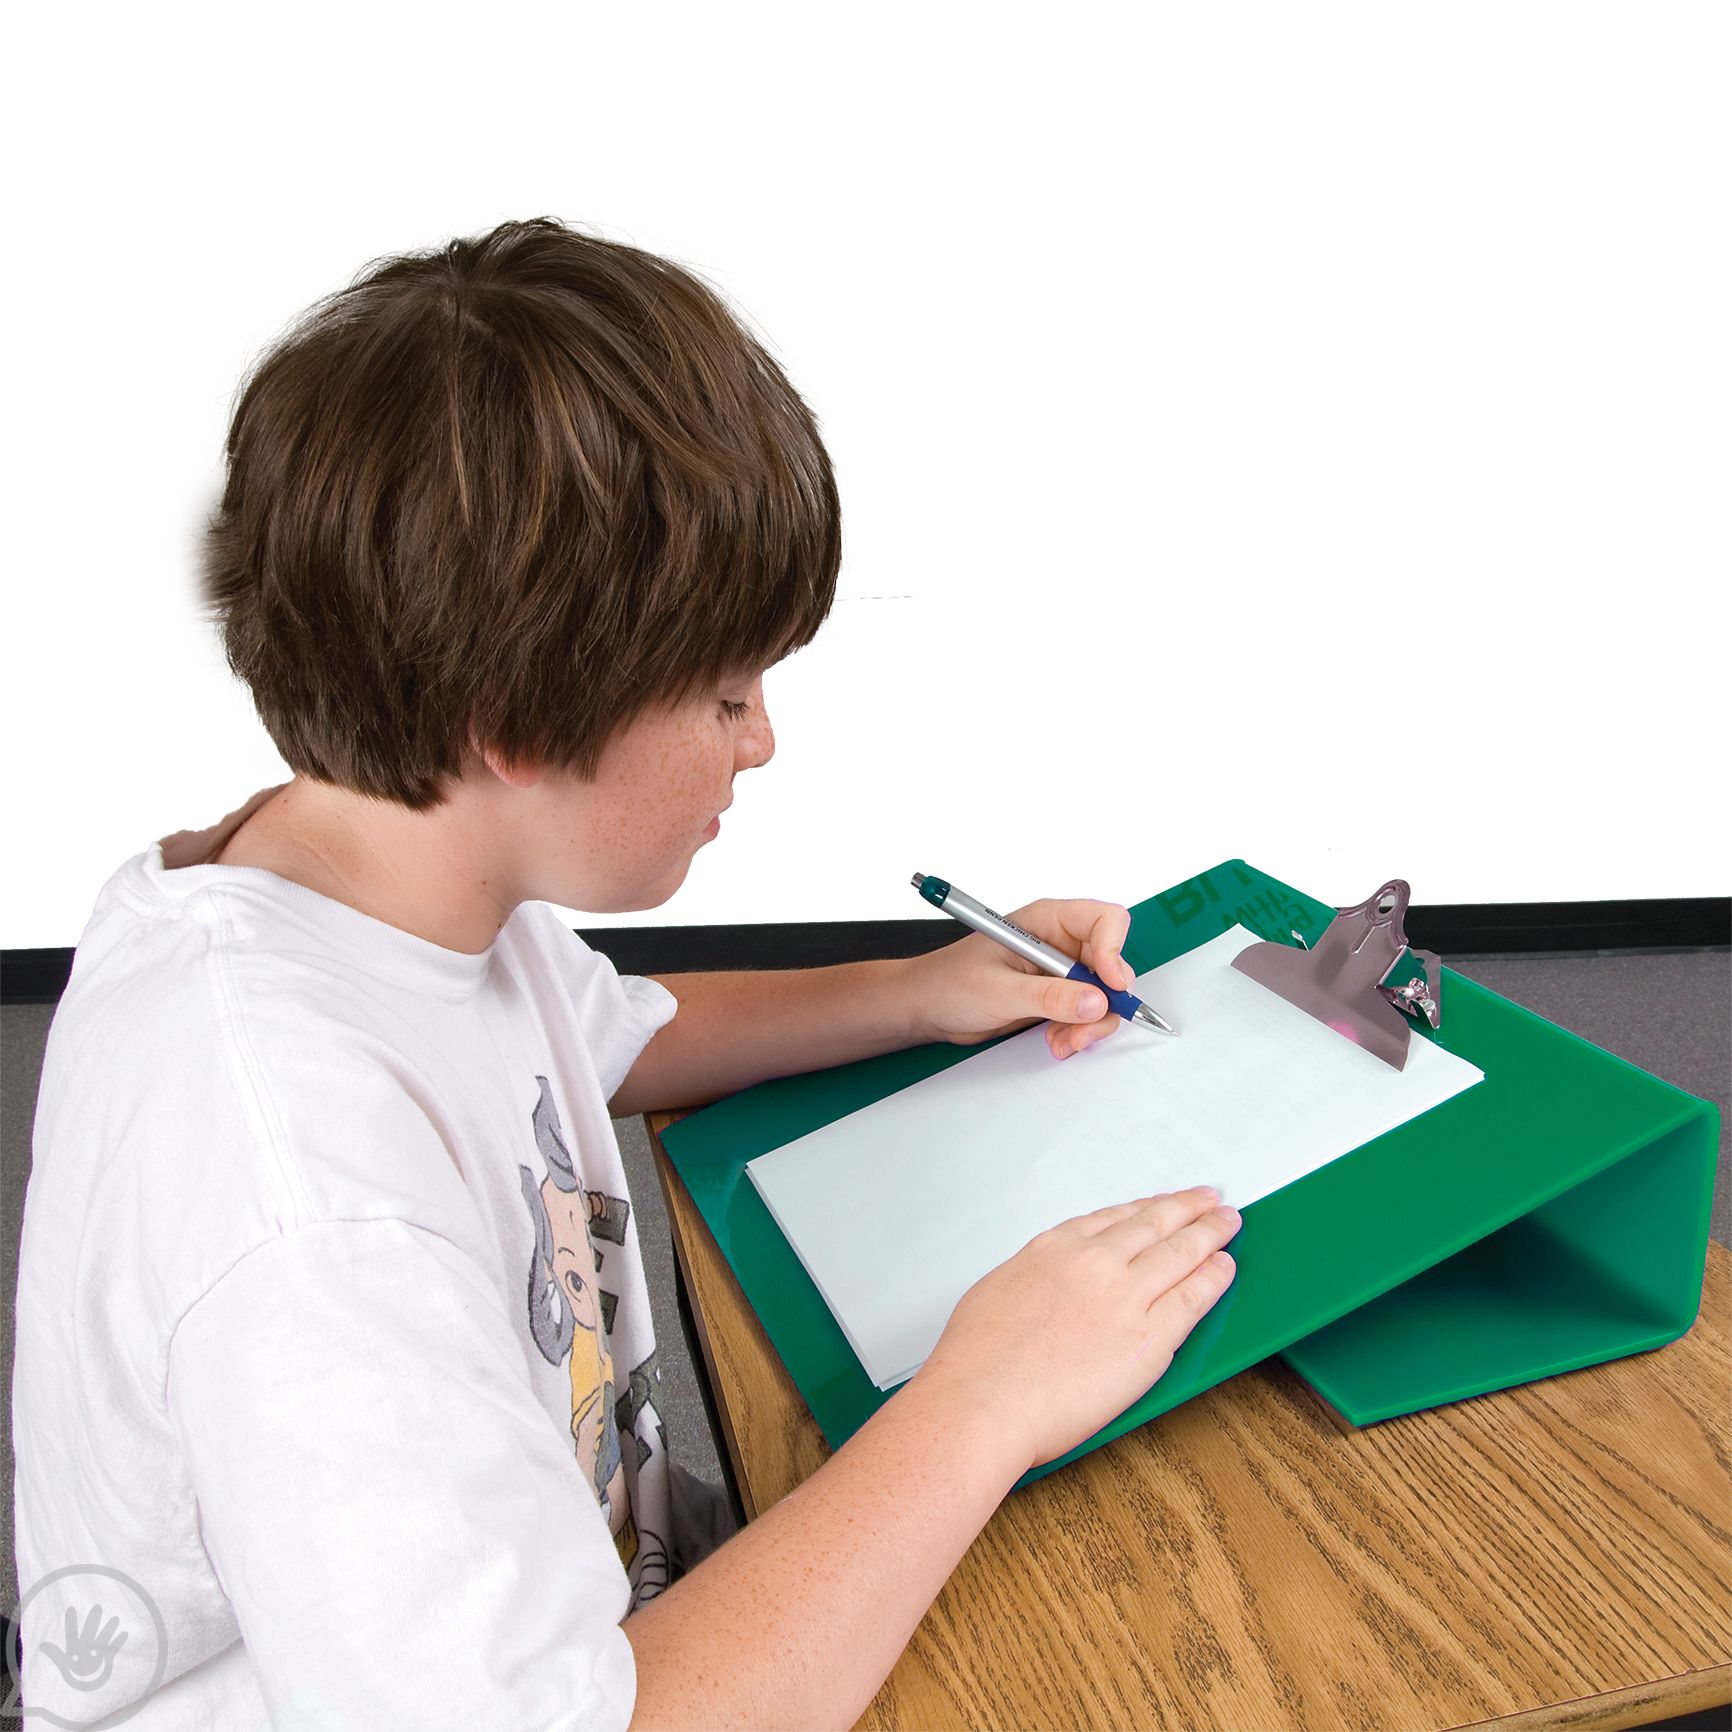 Ergonomic Large A3 Writing Slope for Better Writing Posture – by